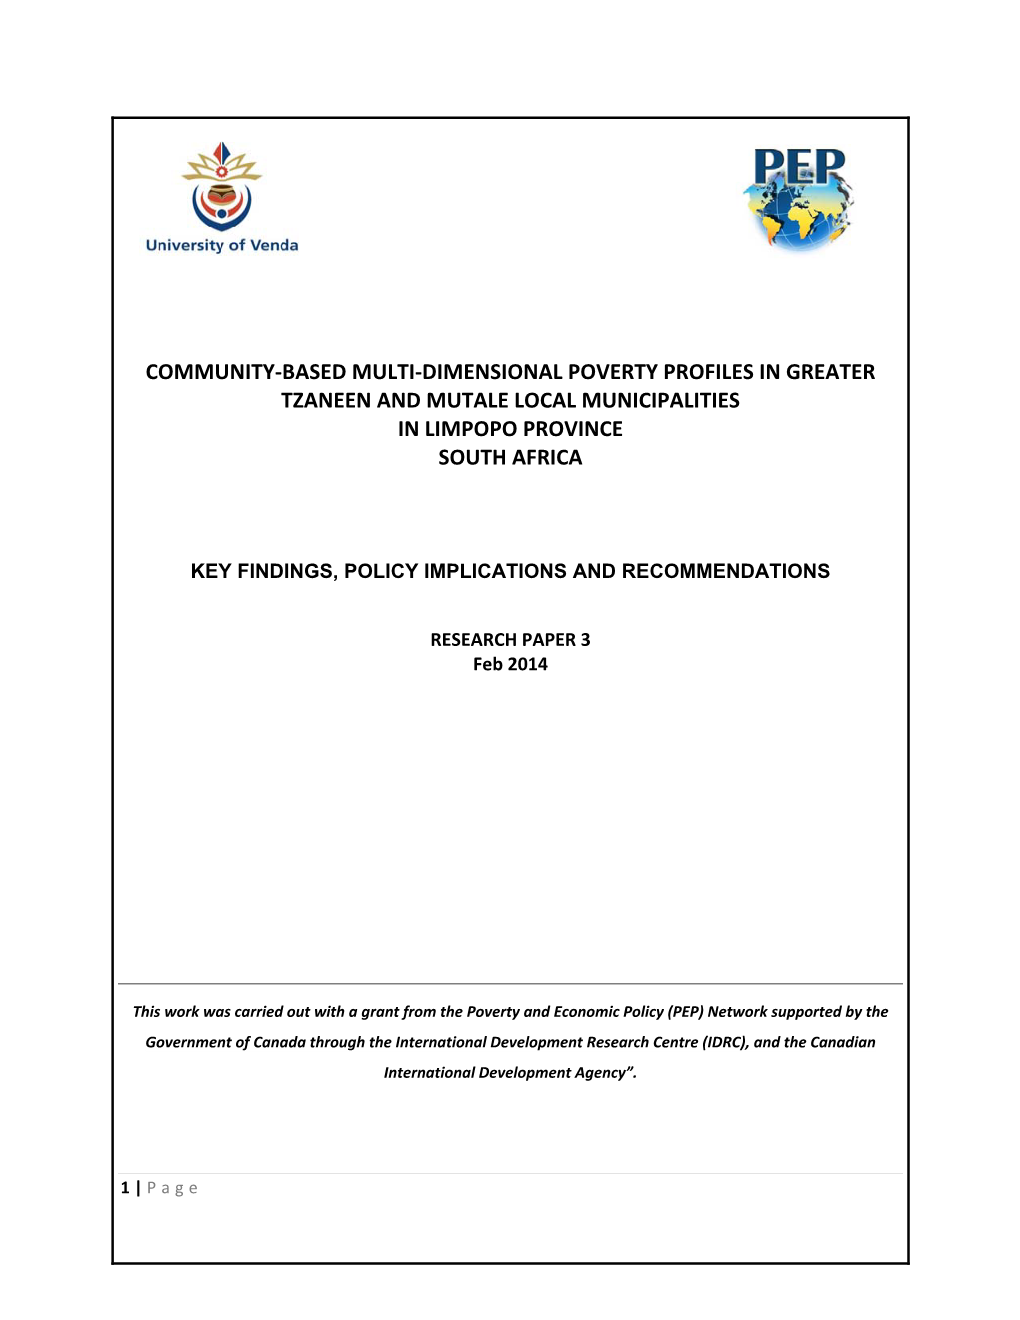 Community-Based Multi-Dimensional Poverty Profiles in Greater Tzaneen and Mutale Local Municipalities in Limpopo Province Sout